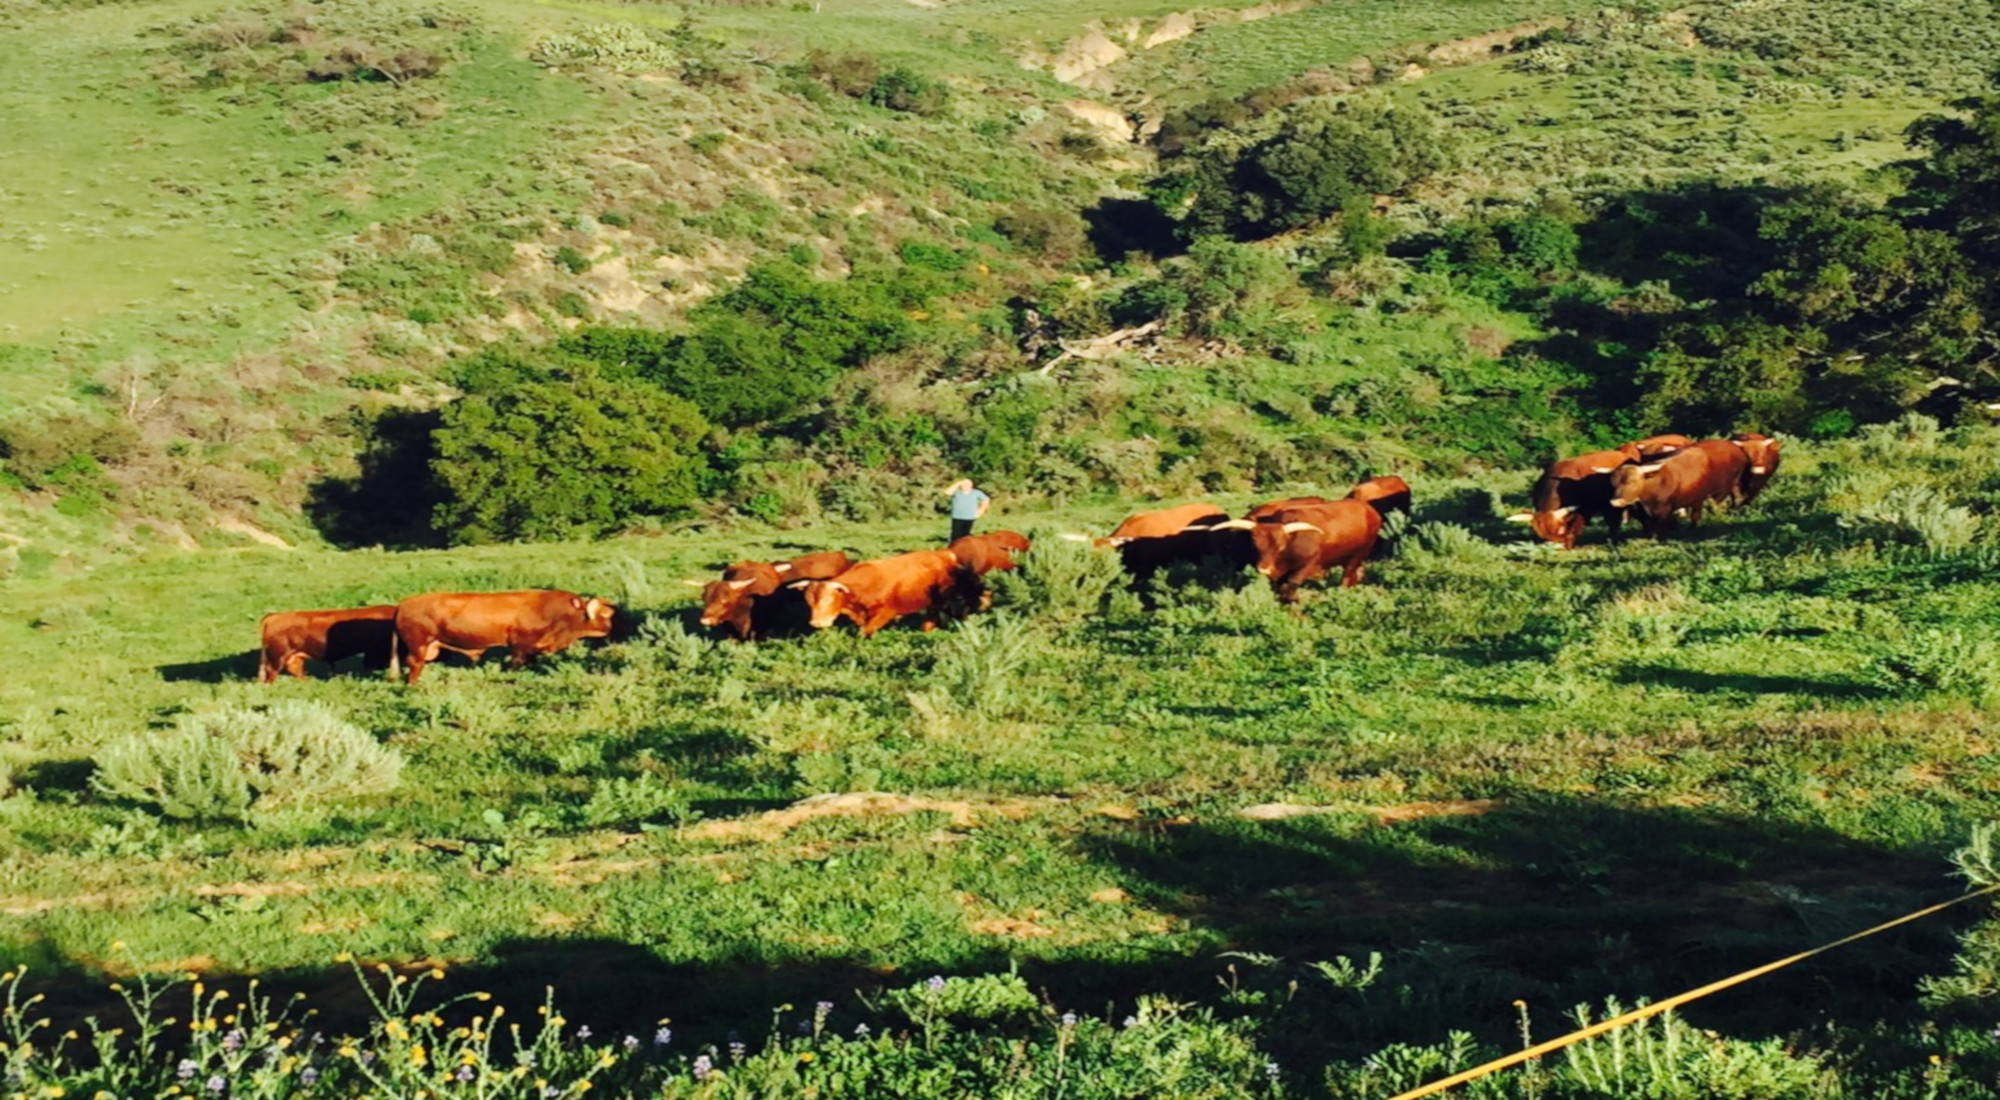 Brown Barzona cattle walking on a green pasture